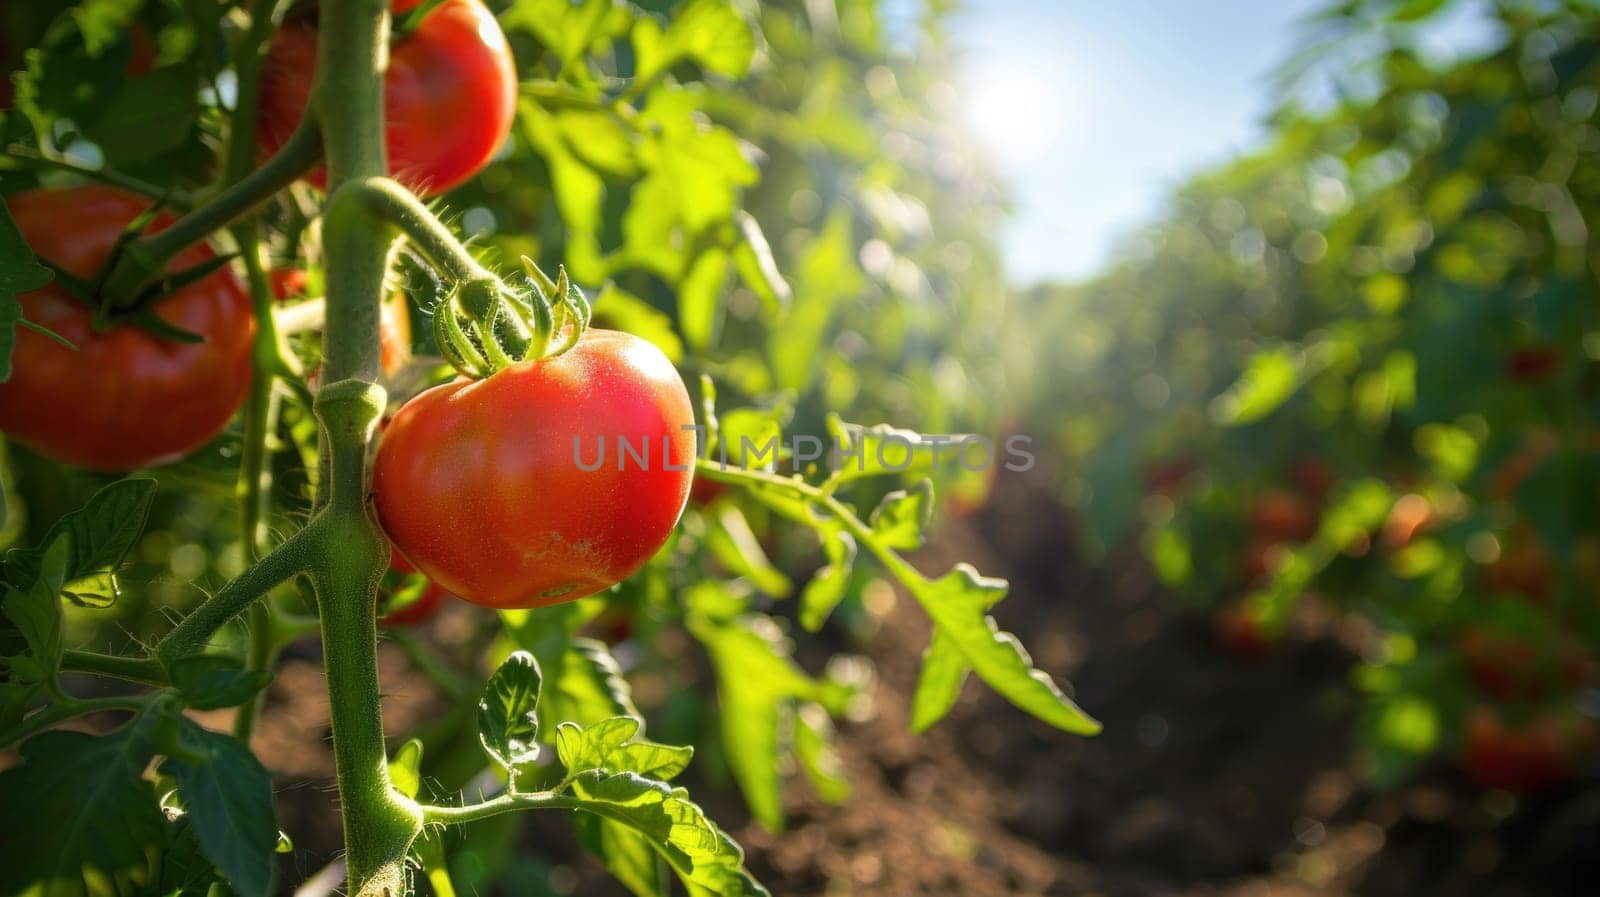 A tomato plant with a red tomato hanging from it. The tomato is surrounded by green leaves. Concept of growth and abundance, as the tomato plant is thriving and producing fruit